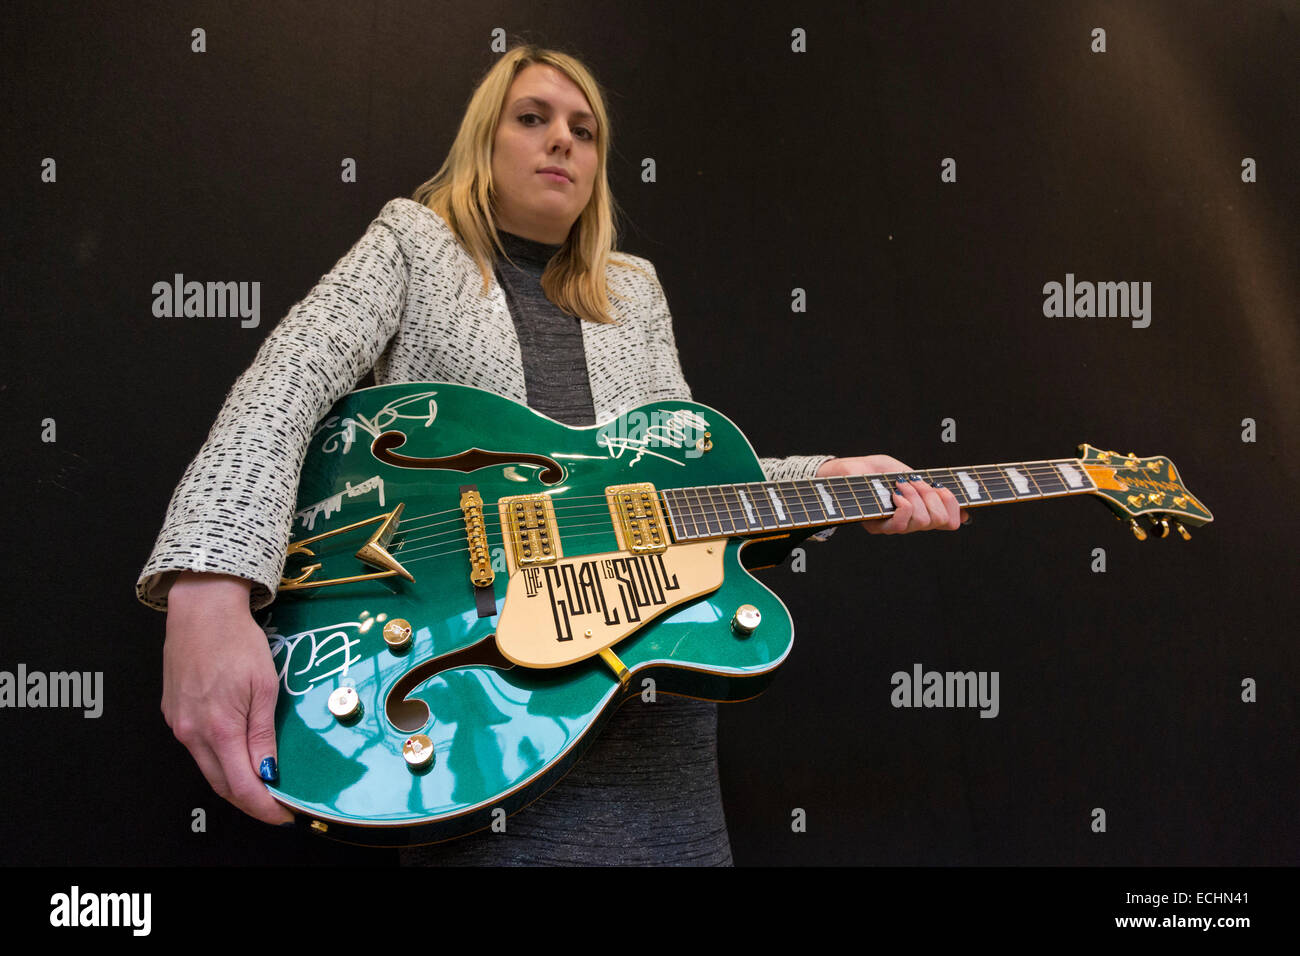 London, UK. 12 December 2014. A Christie's employee poses with Bono's custom prototype Gretsch Irish Falcon electric guitar signed by all four members of U2, estimate GBP 120,000-180,000. Christie's unveils Memorabilia of Hollywood Icons & Music Legends from the 20/21 Pop Culture Sale ahead of a free public view from 13 to 16 December 2014, with the auction taking place on 16 December. The sale celebrates some of the great names of 20th century cinema and music legends, featuring costumes and film scripts, instruments and handwritten song lyrics. Stock Photo